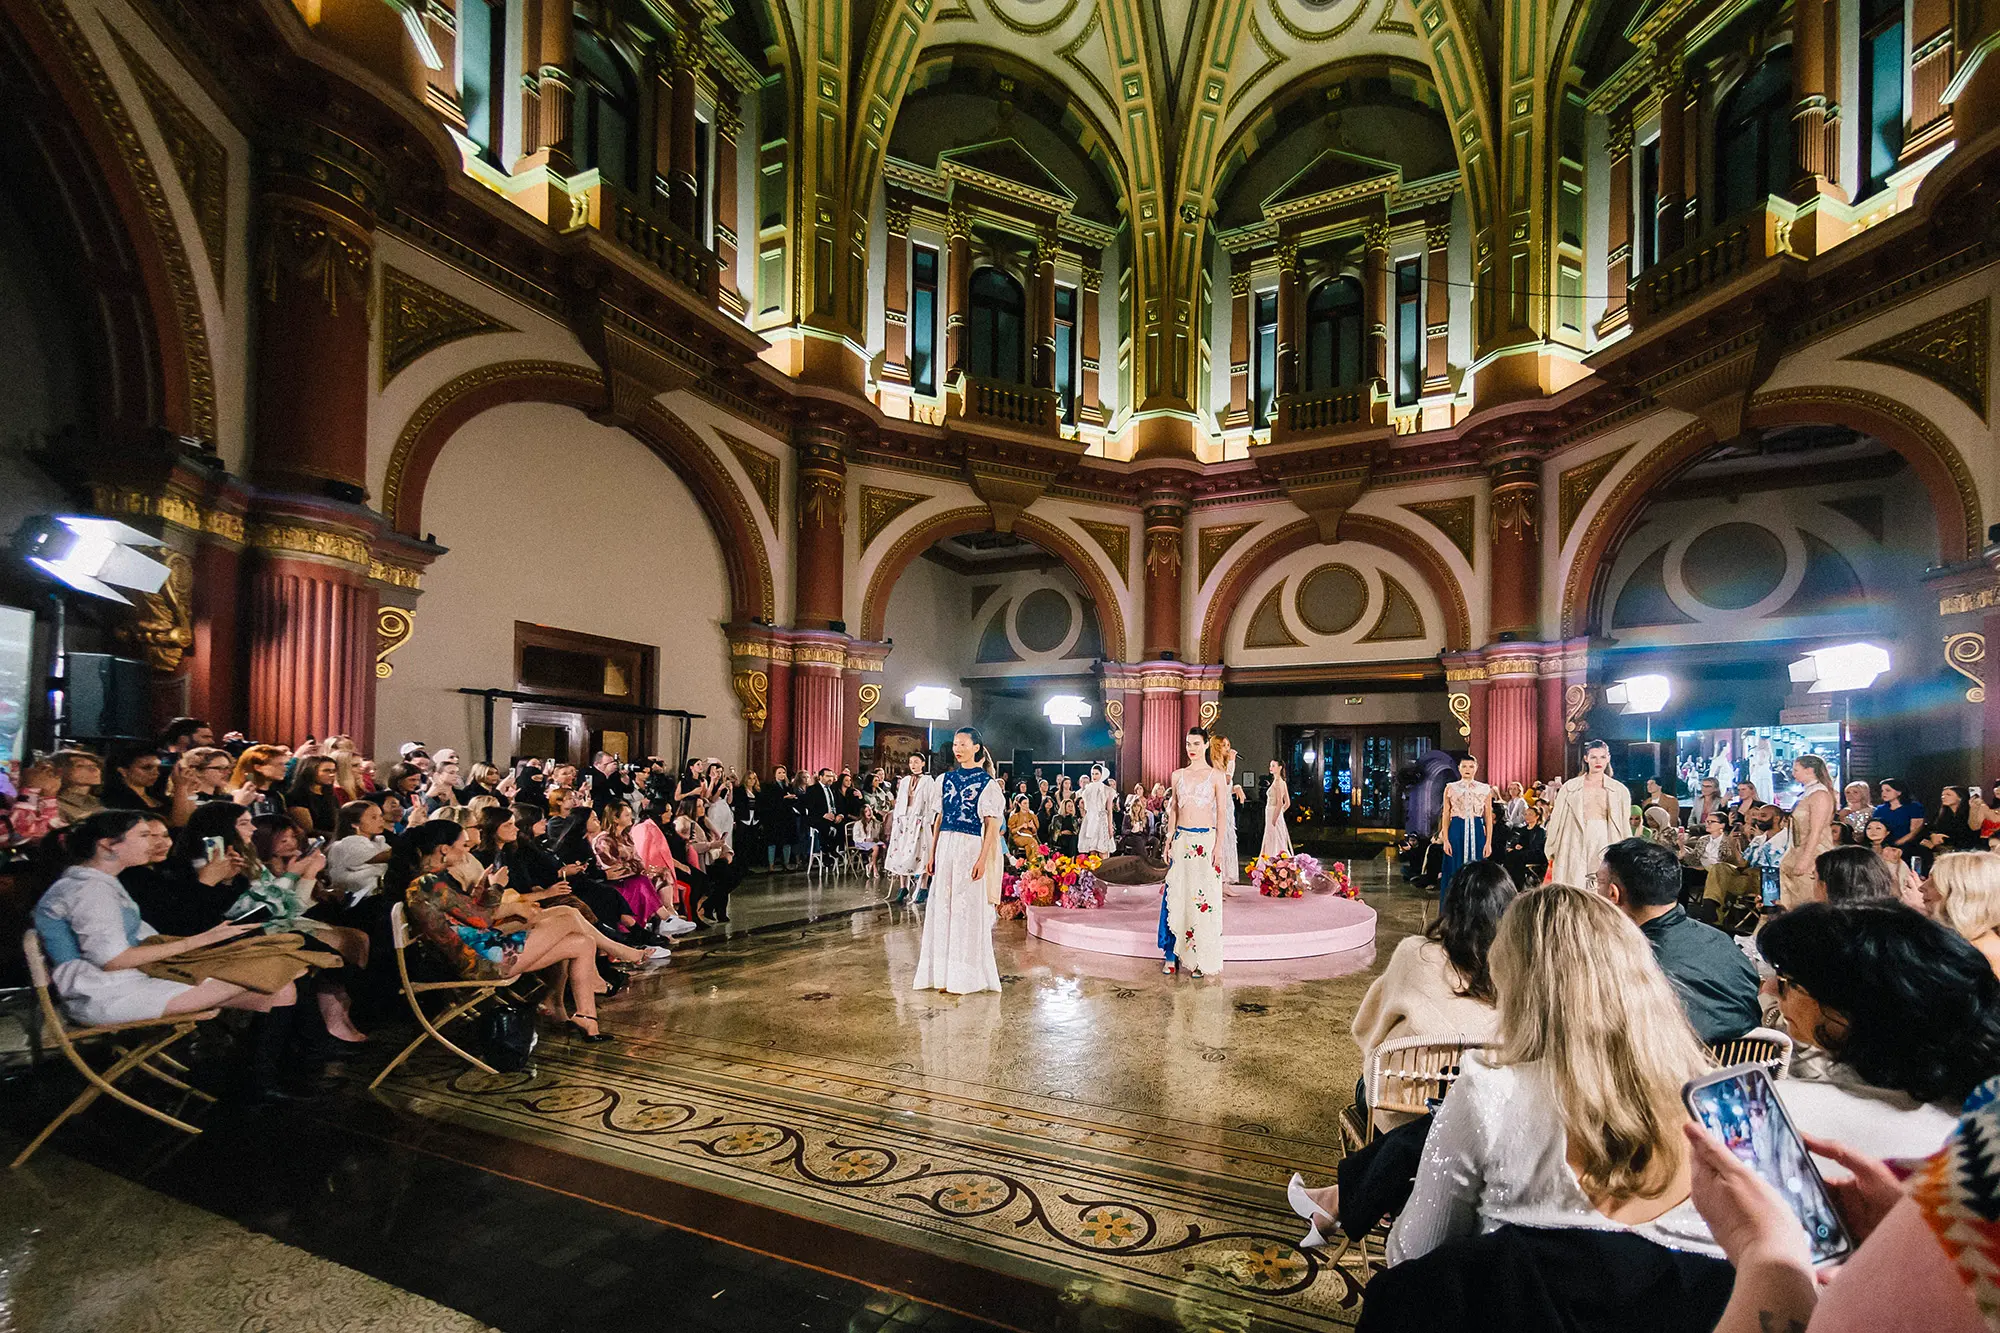 Melbourne Fashion Week Runways - fashion runway event and production - Melbourne, Australia